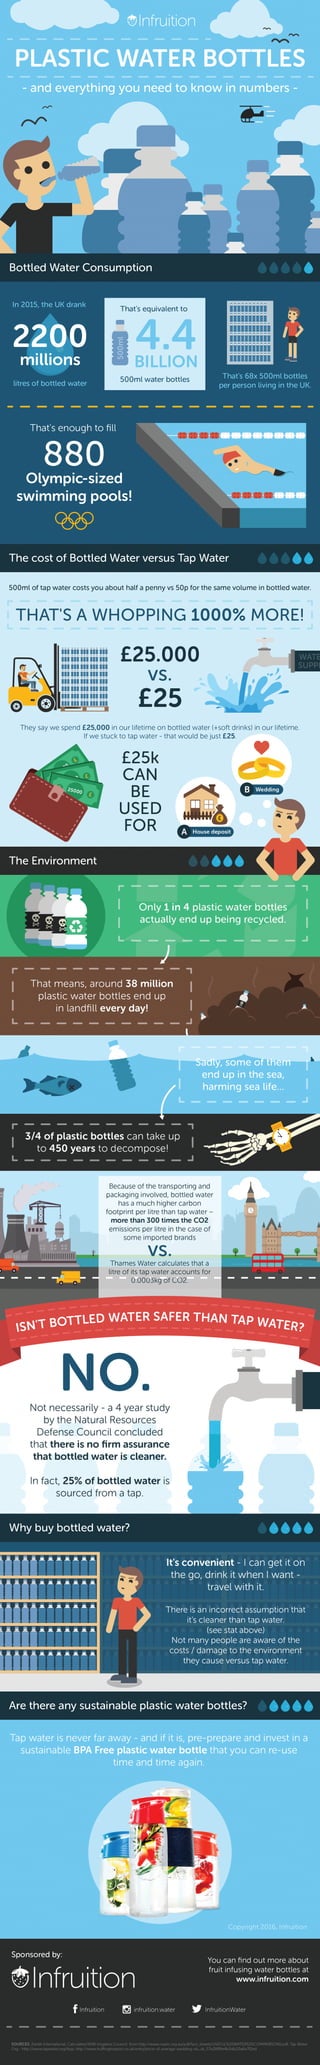 The Ugly Truth about Plastic Water Bottles